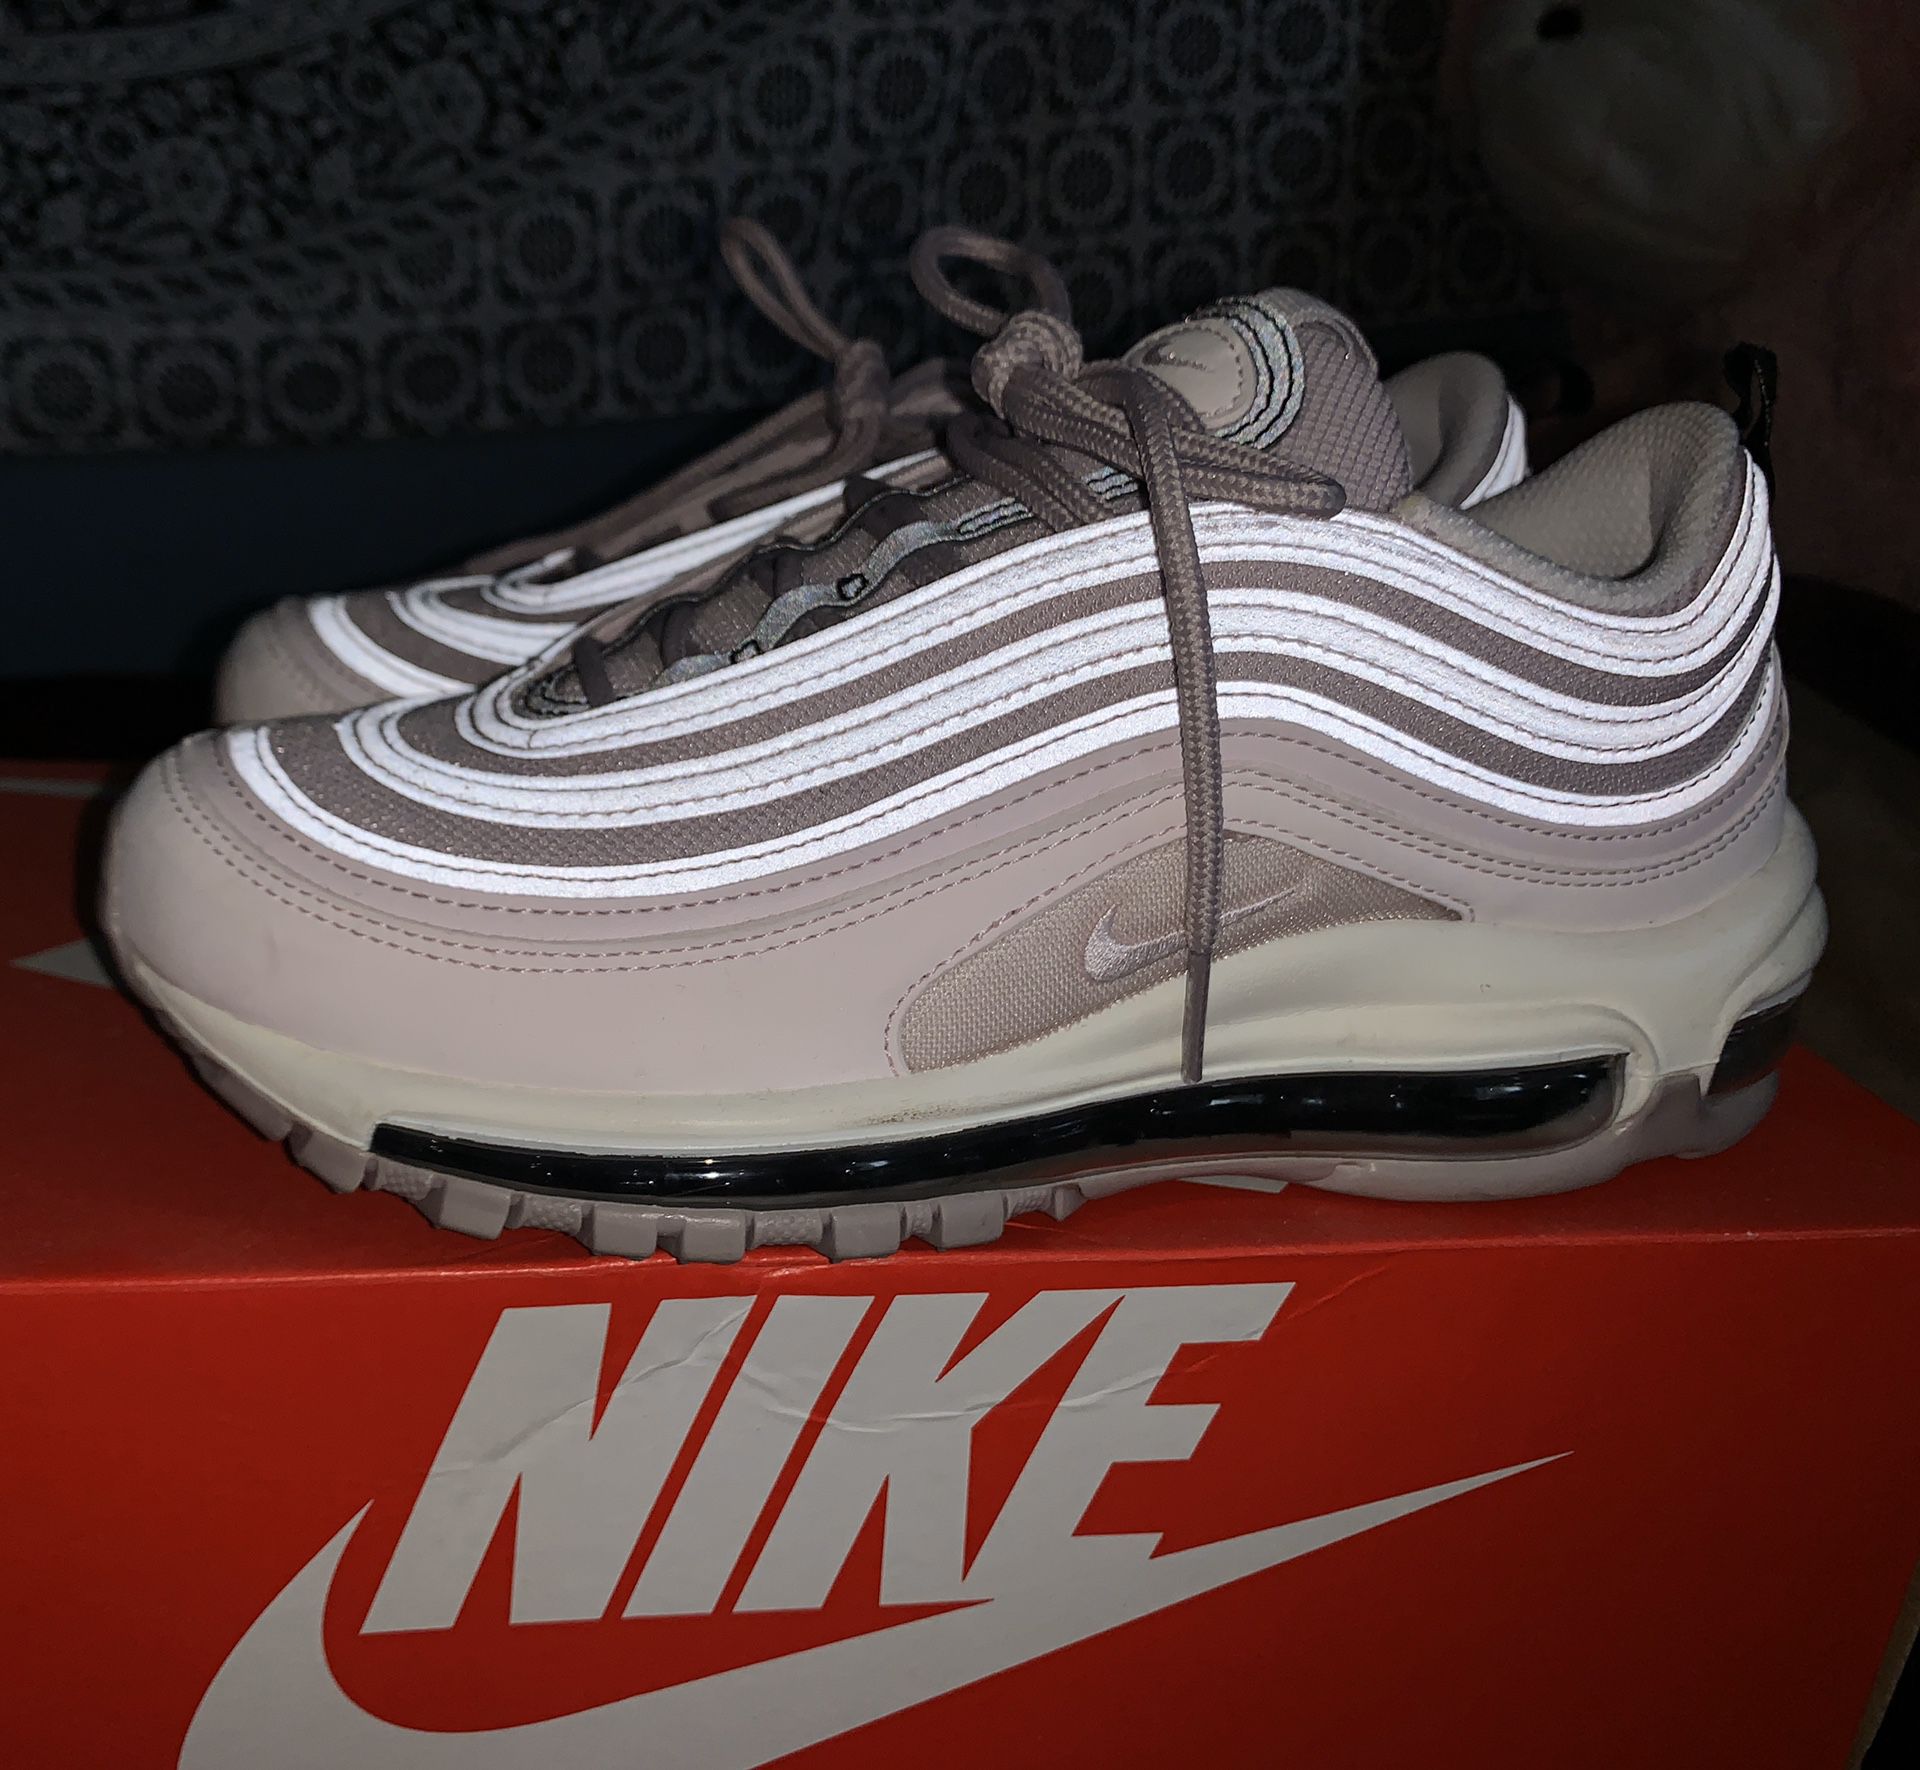 Nike Air Max 97 Women’s (size 7) OBO